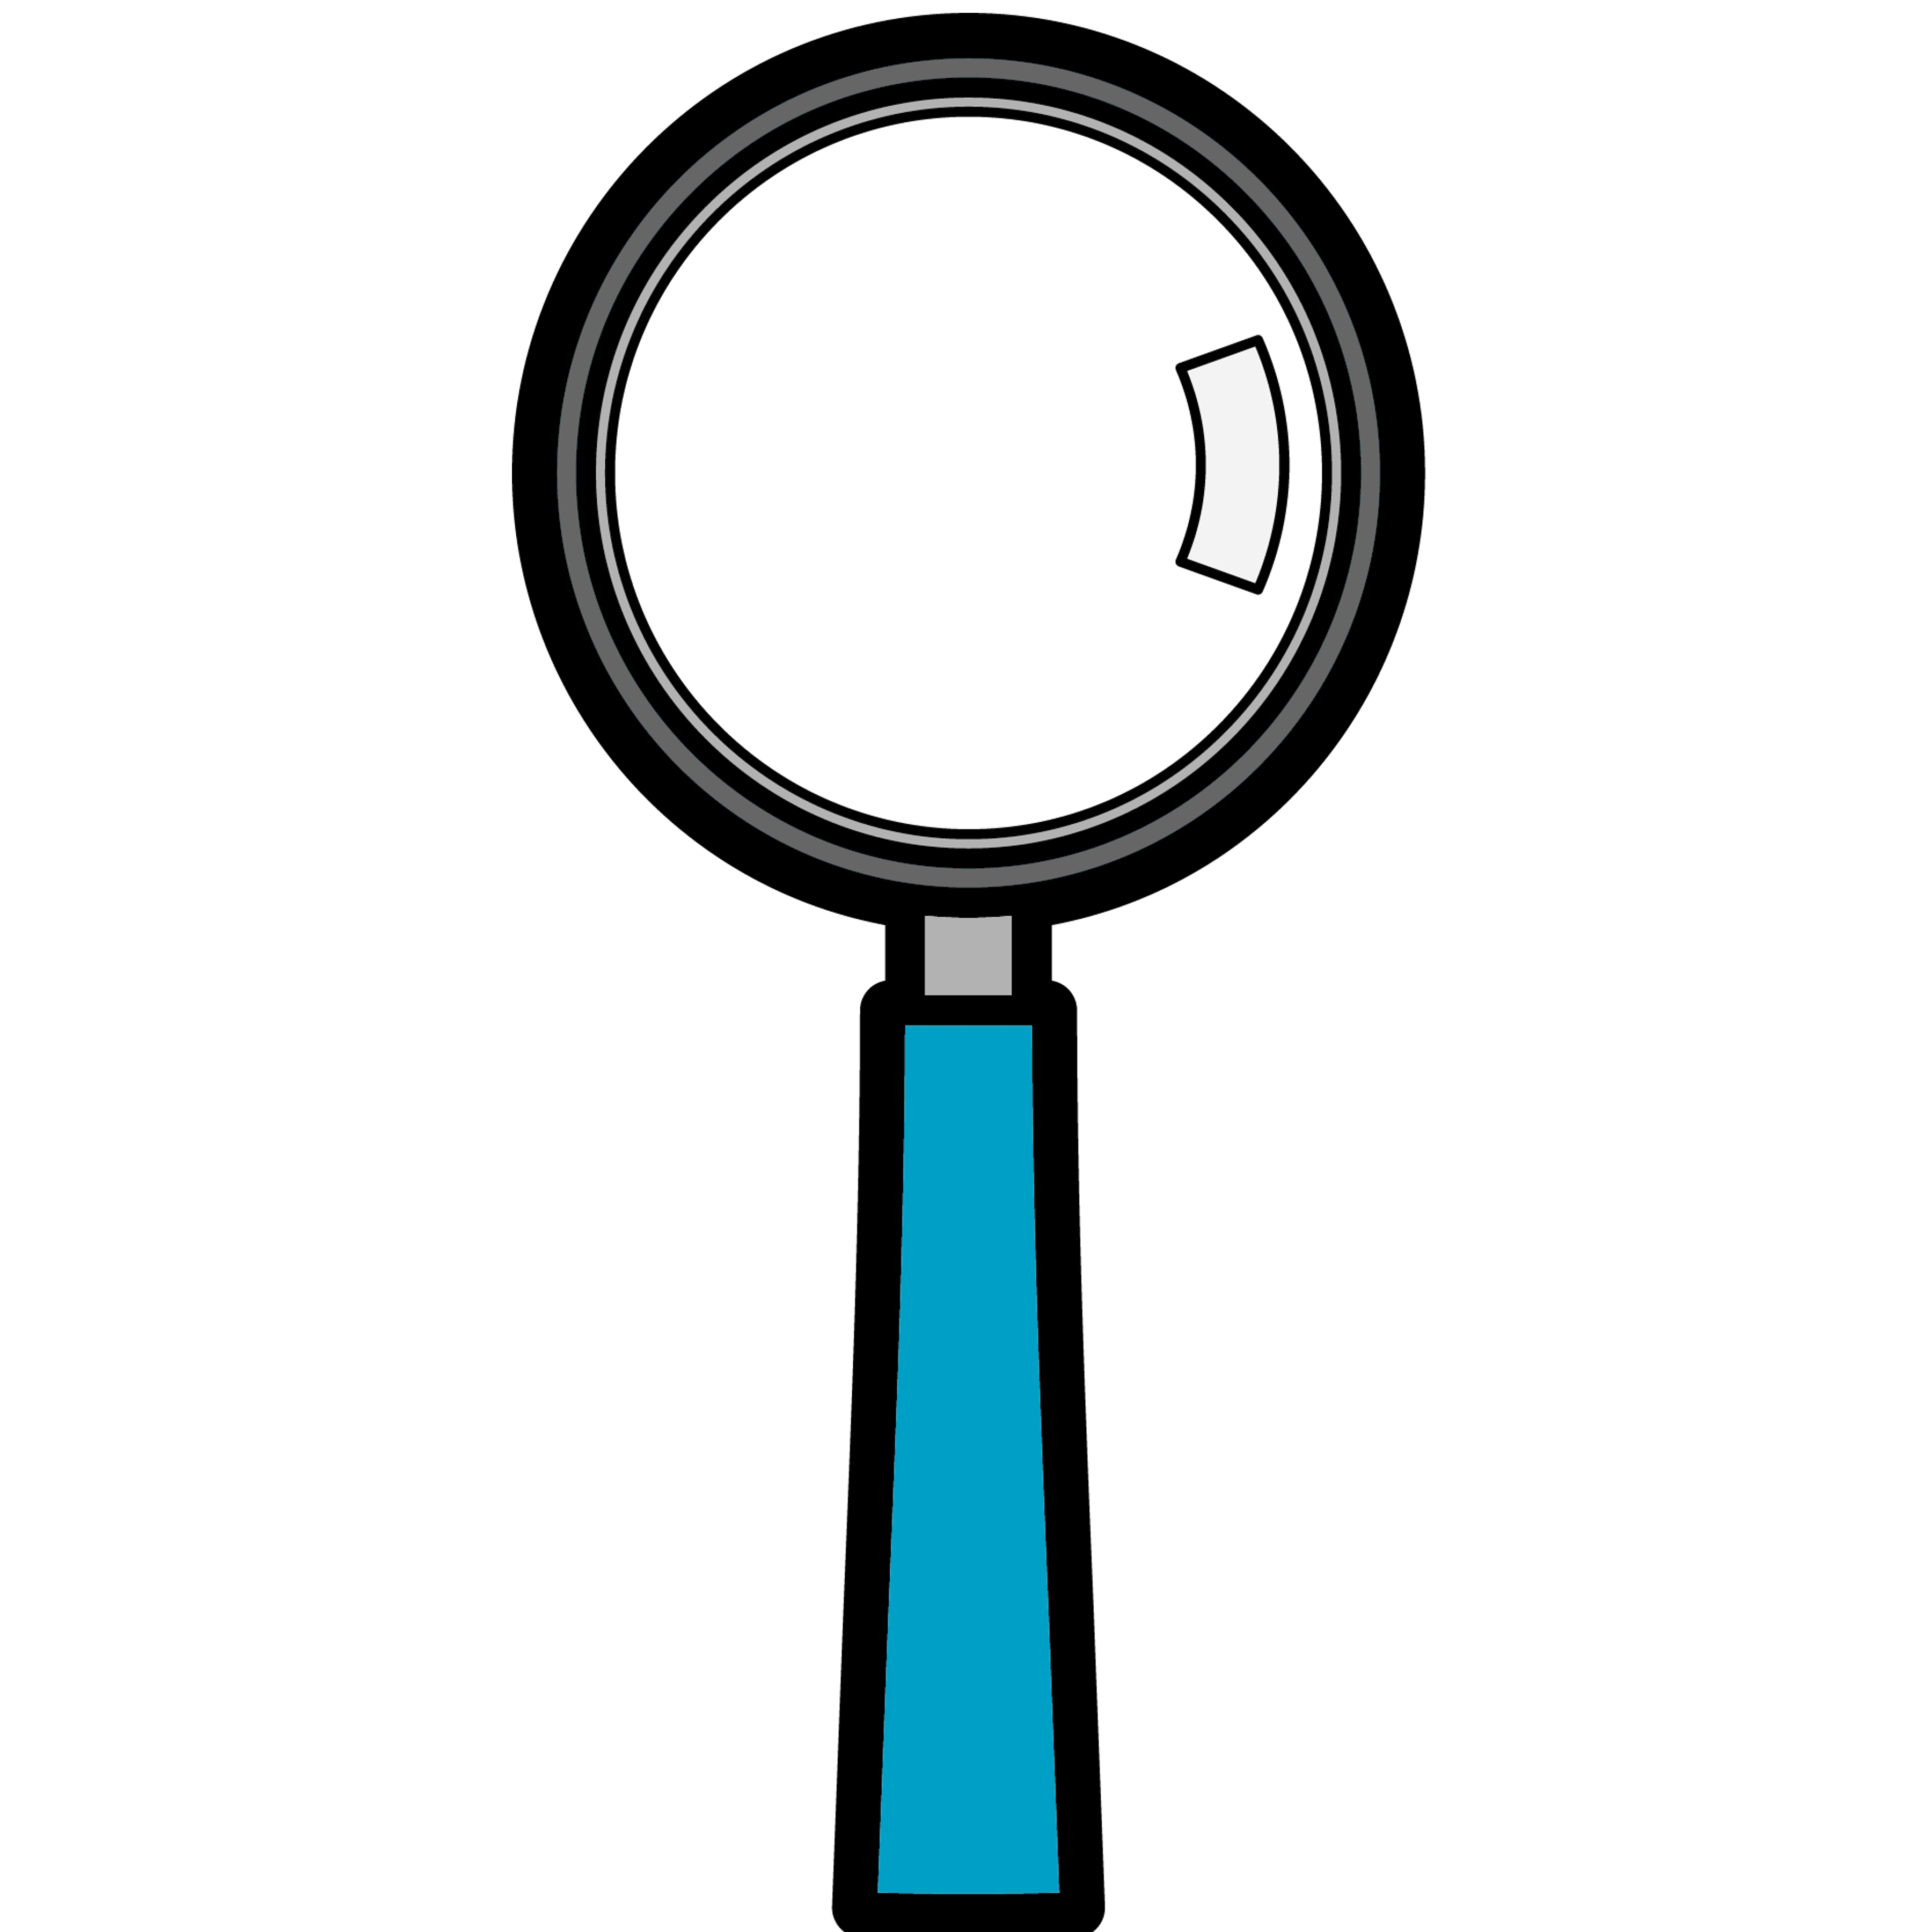 Magnifying glass magnify glass clip art at vector clip art 3 ...